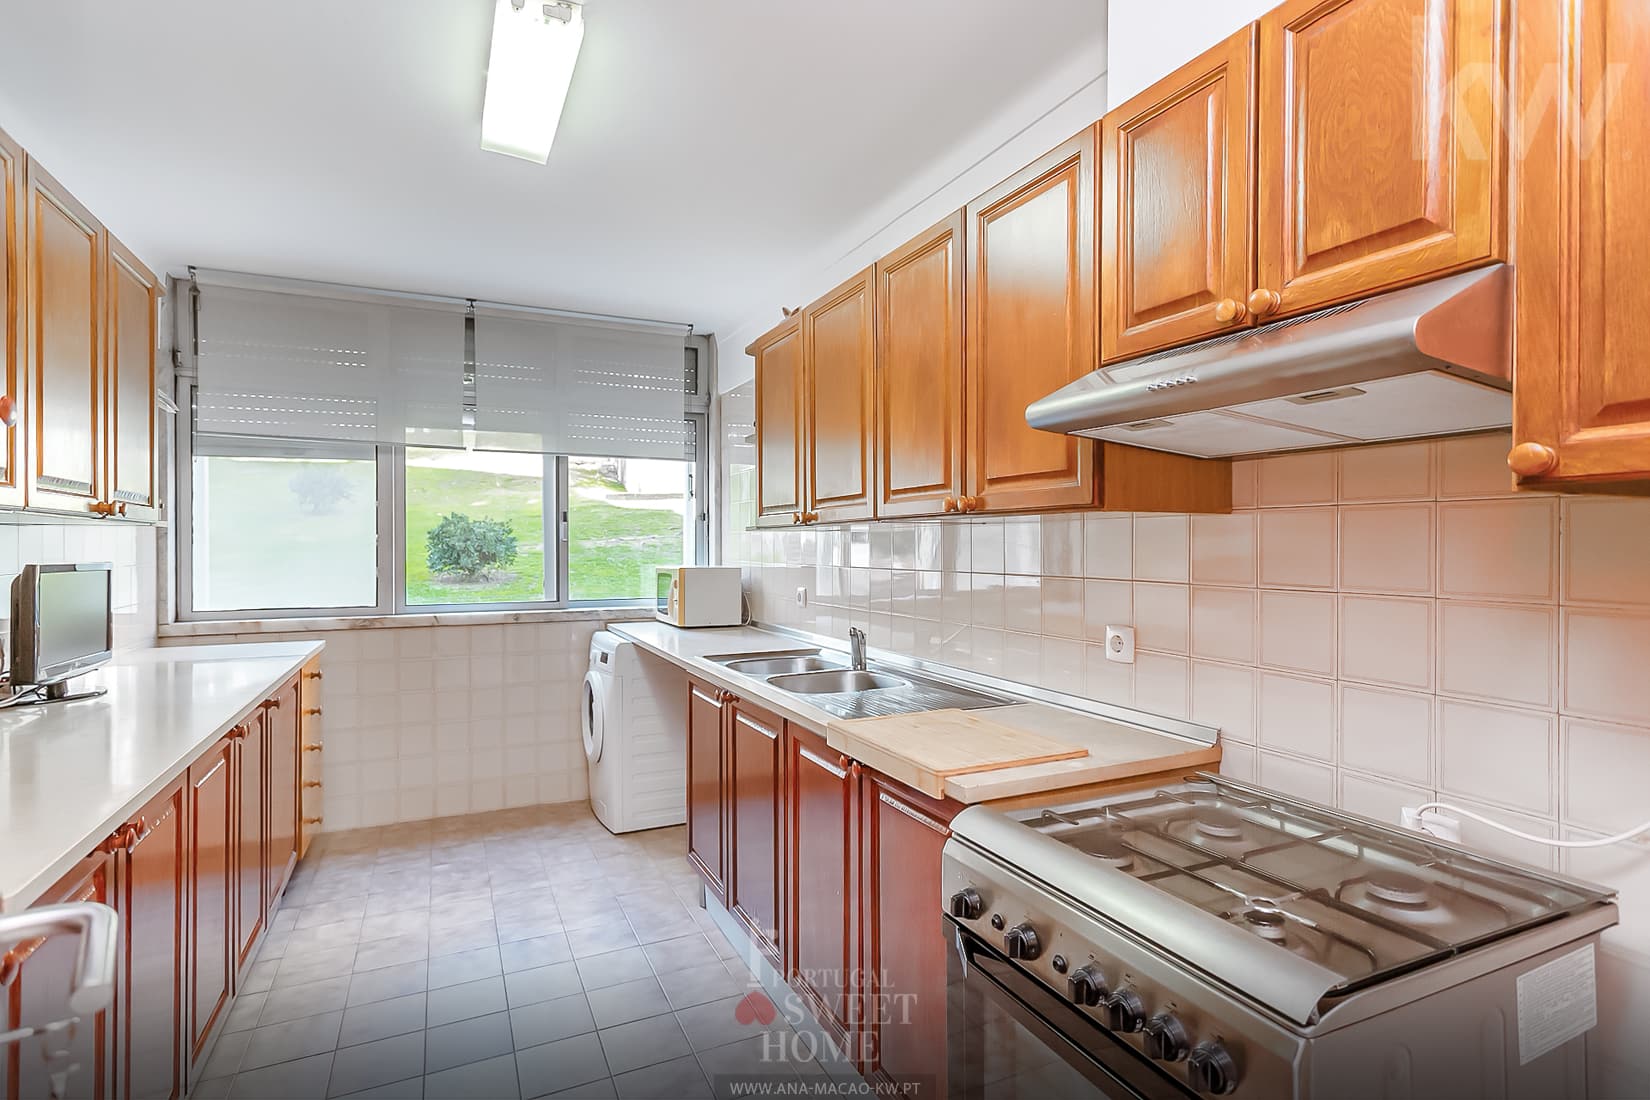 Fully equipped kitchen (10.2 m2)